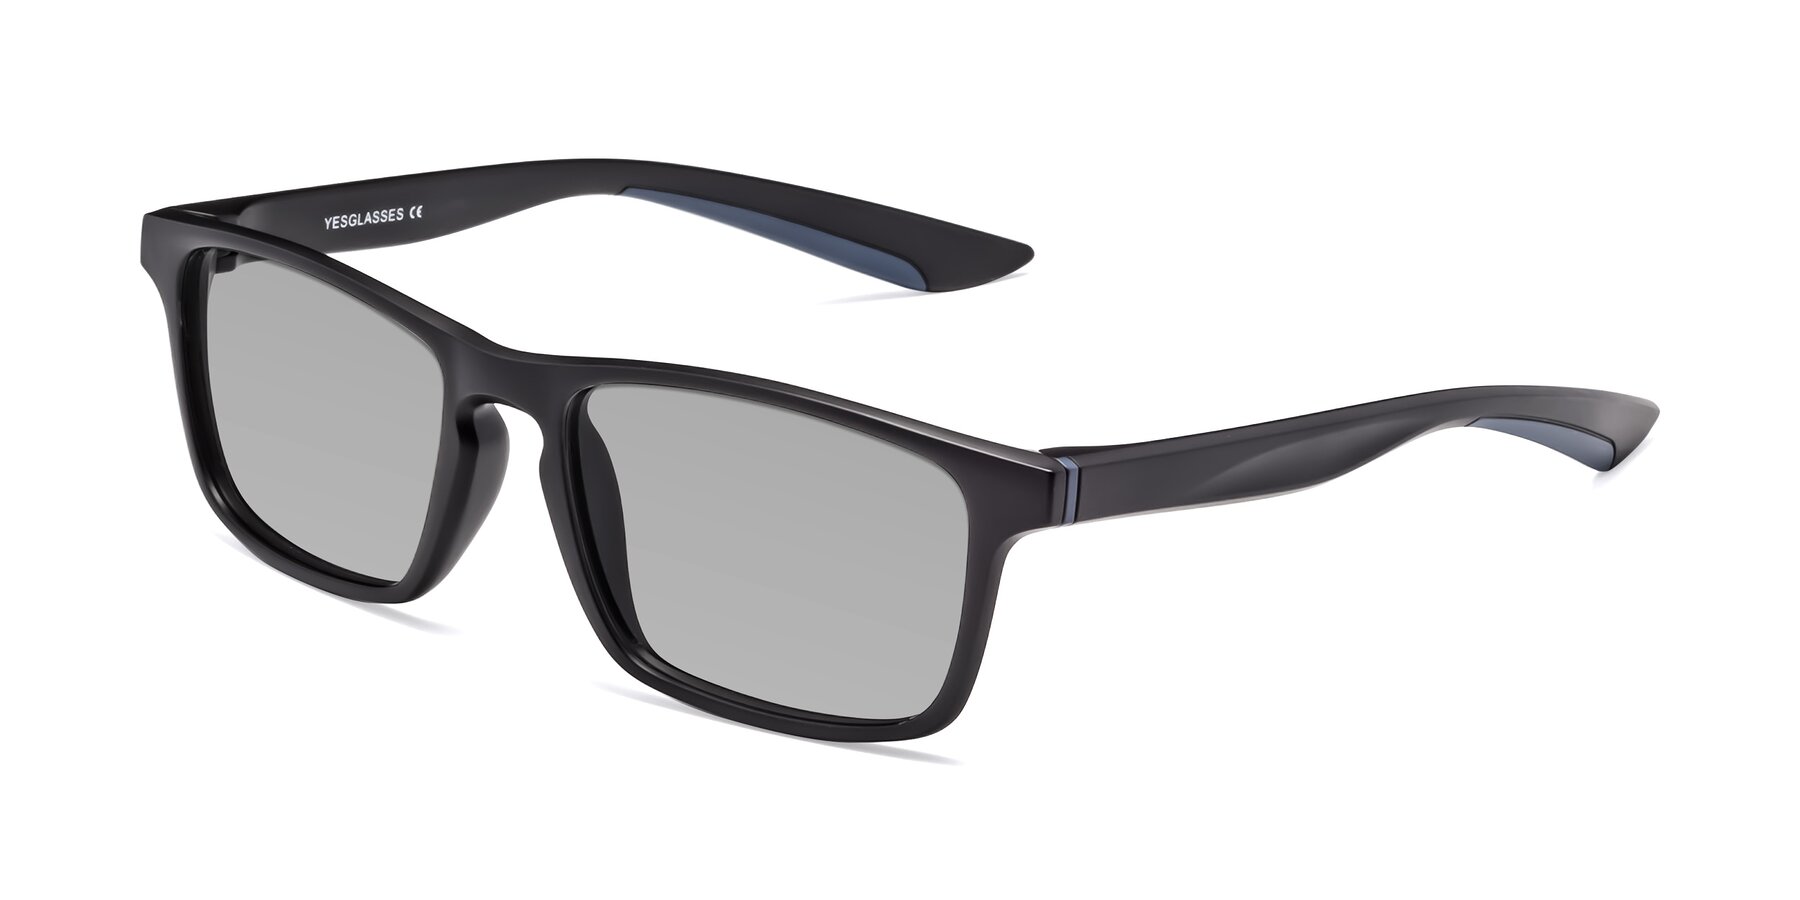 Angle of Passion in Matte Black-Blue with Light Gray Tinted Lenses